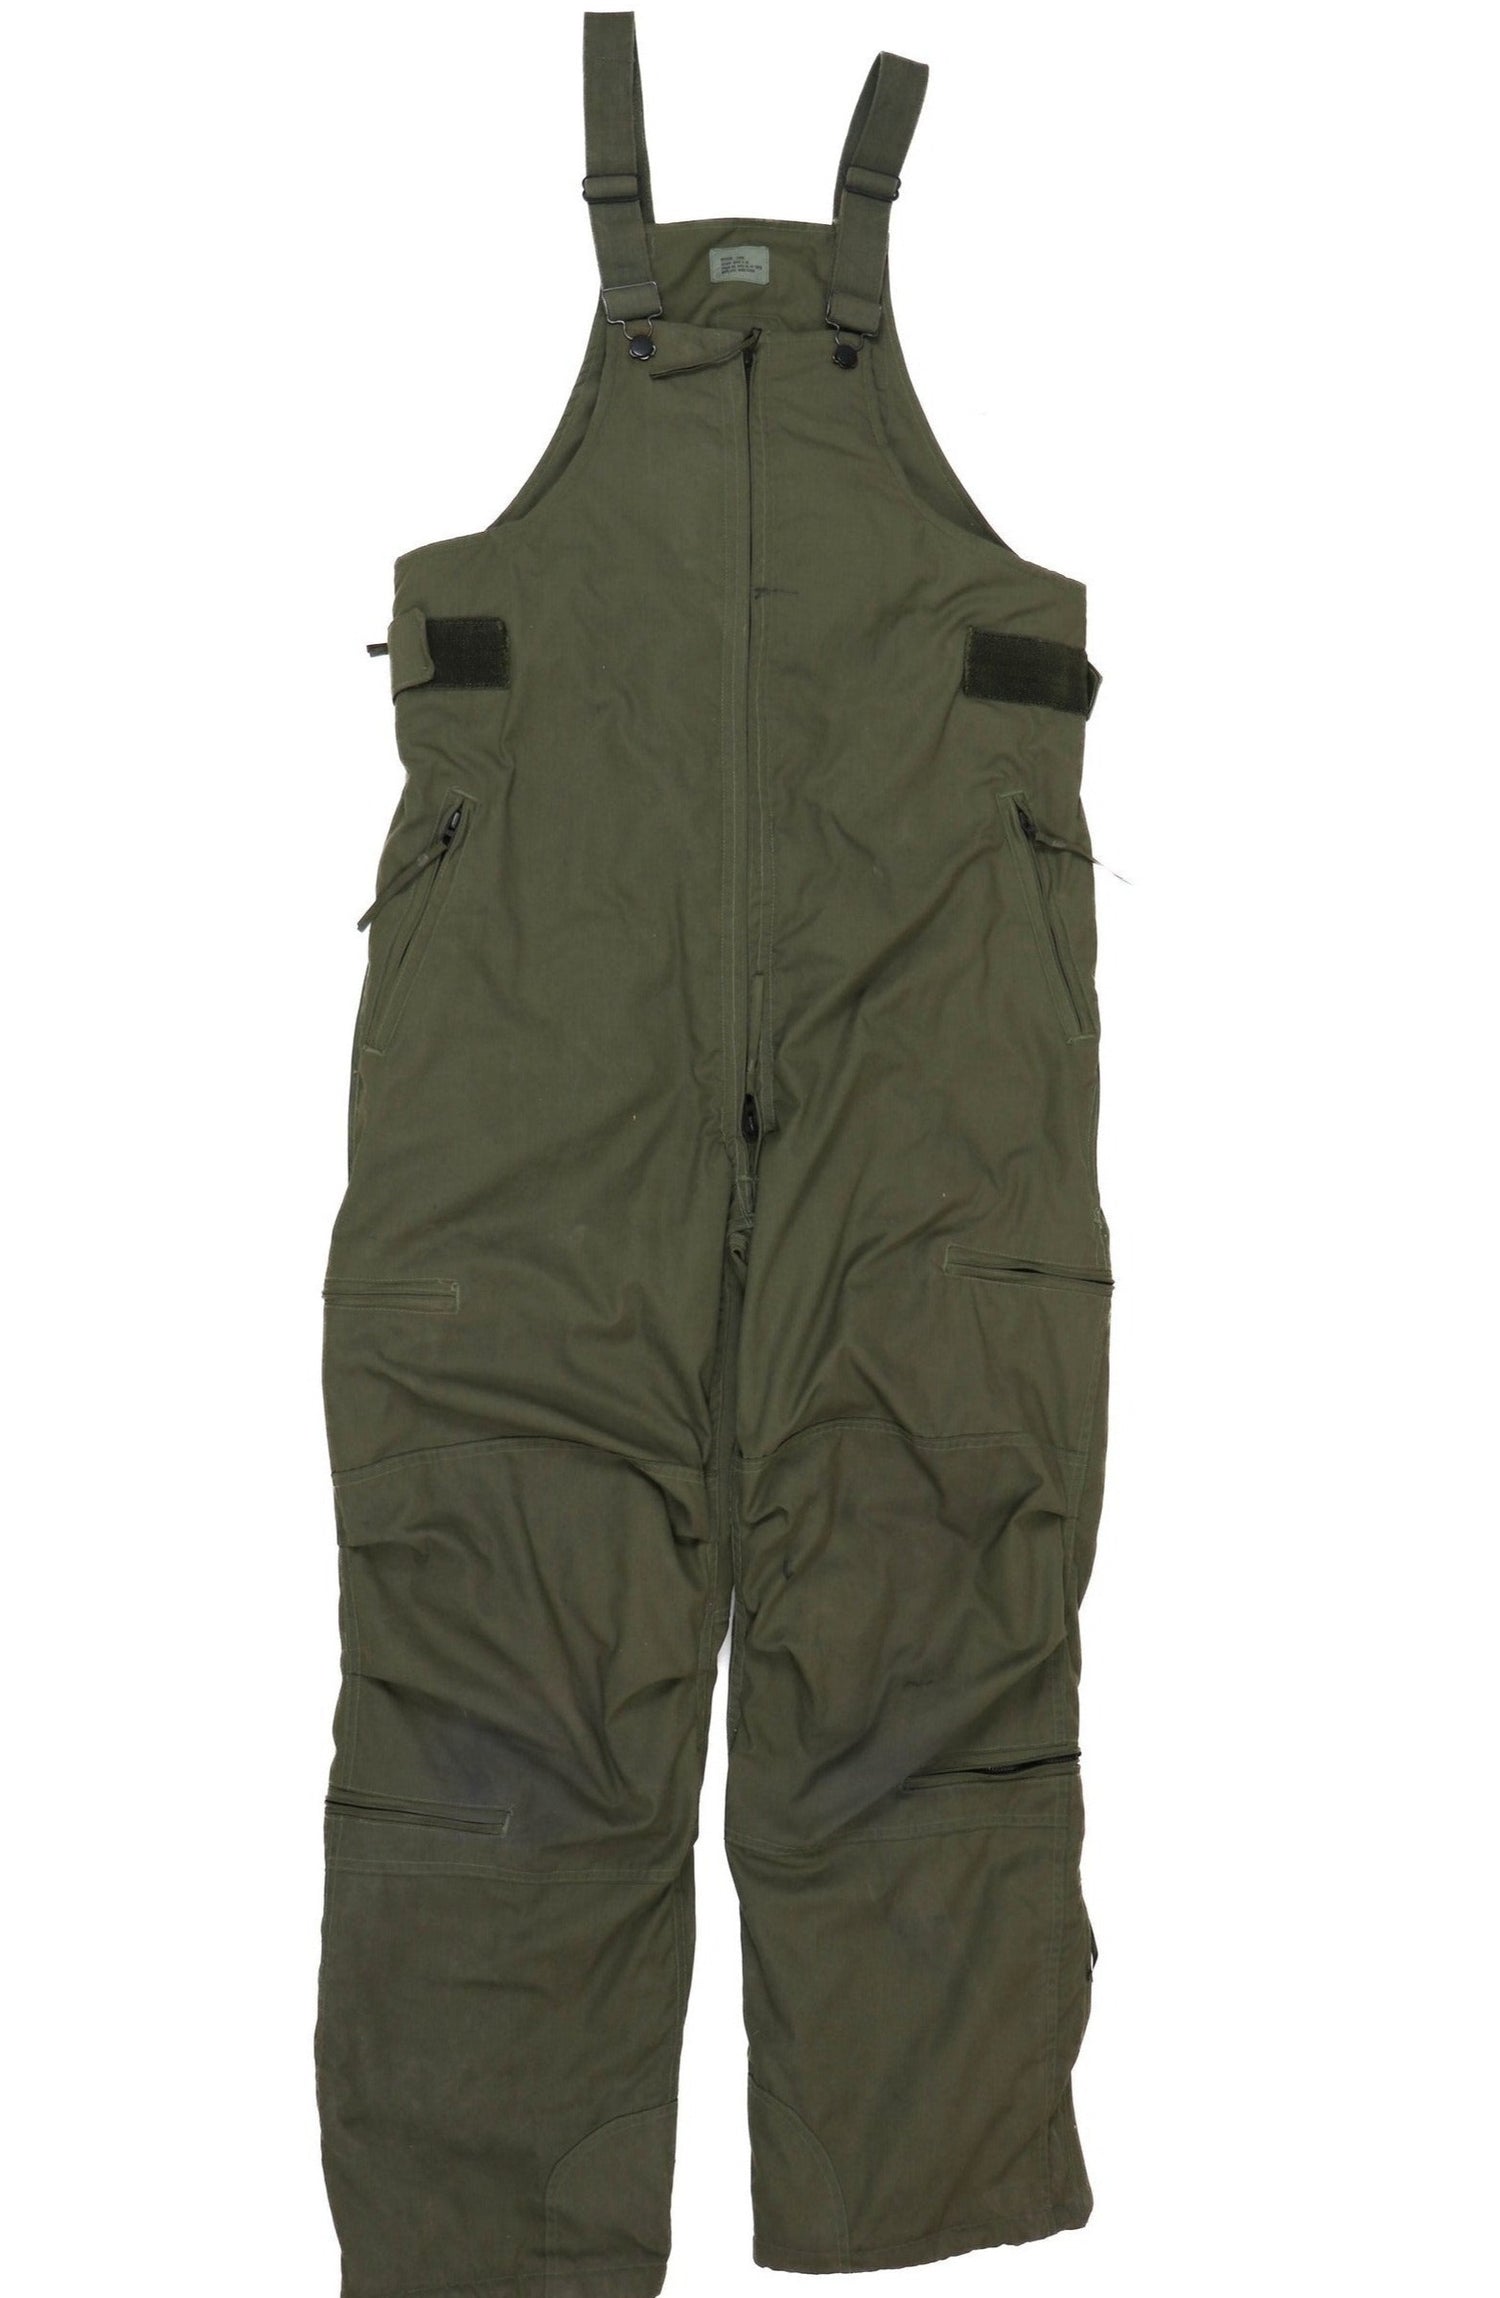 US Military OD Mounted Crewmen's and Aircrewmen's Overalls